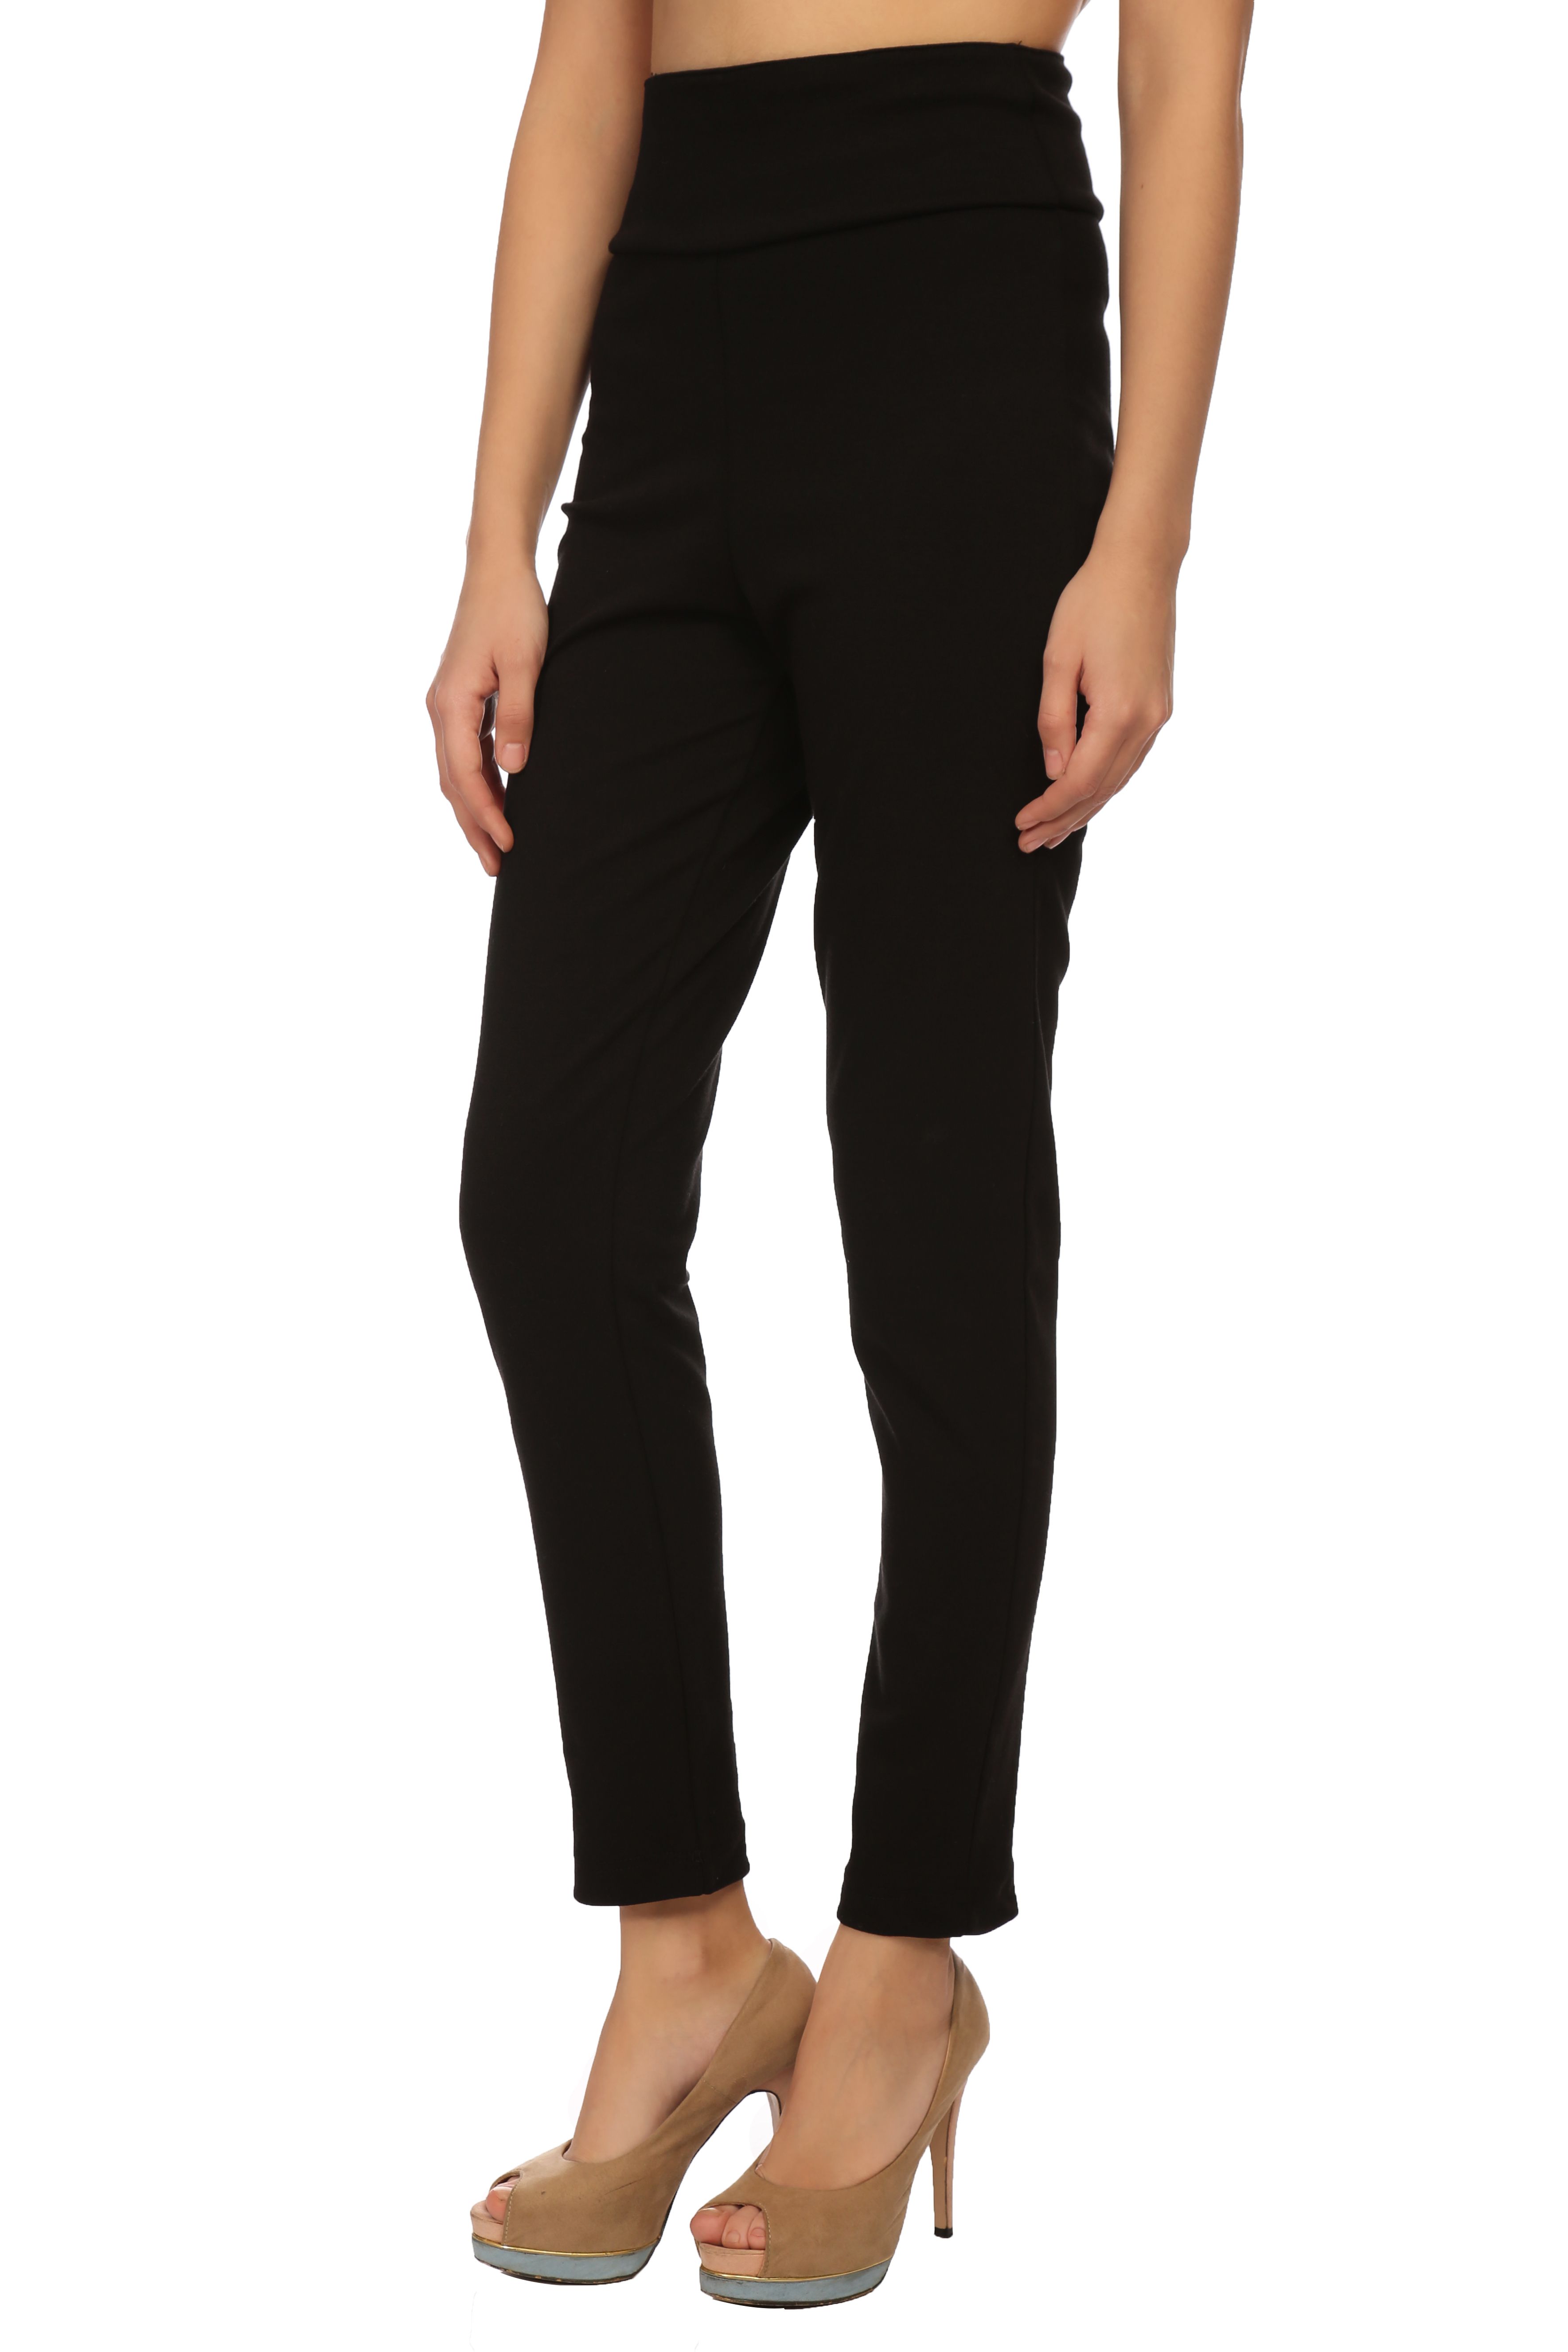 Buy Veronique Lycra Casual Pants Online at Best Prices in India - Snapdeal